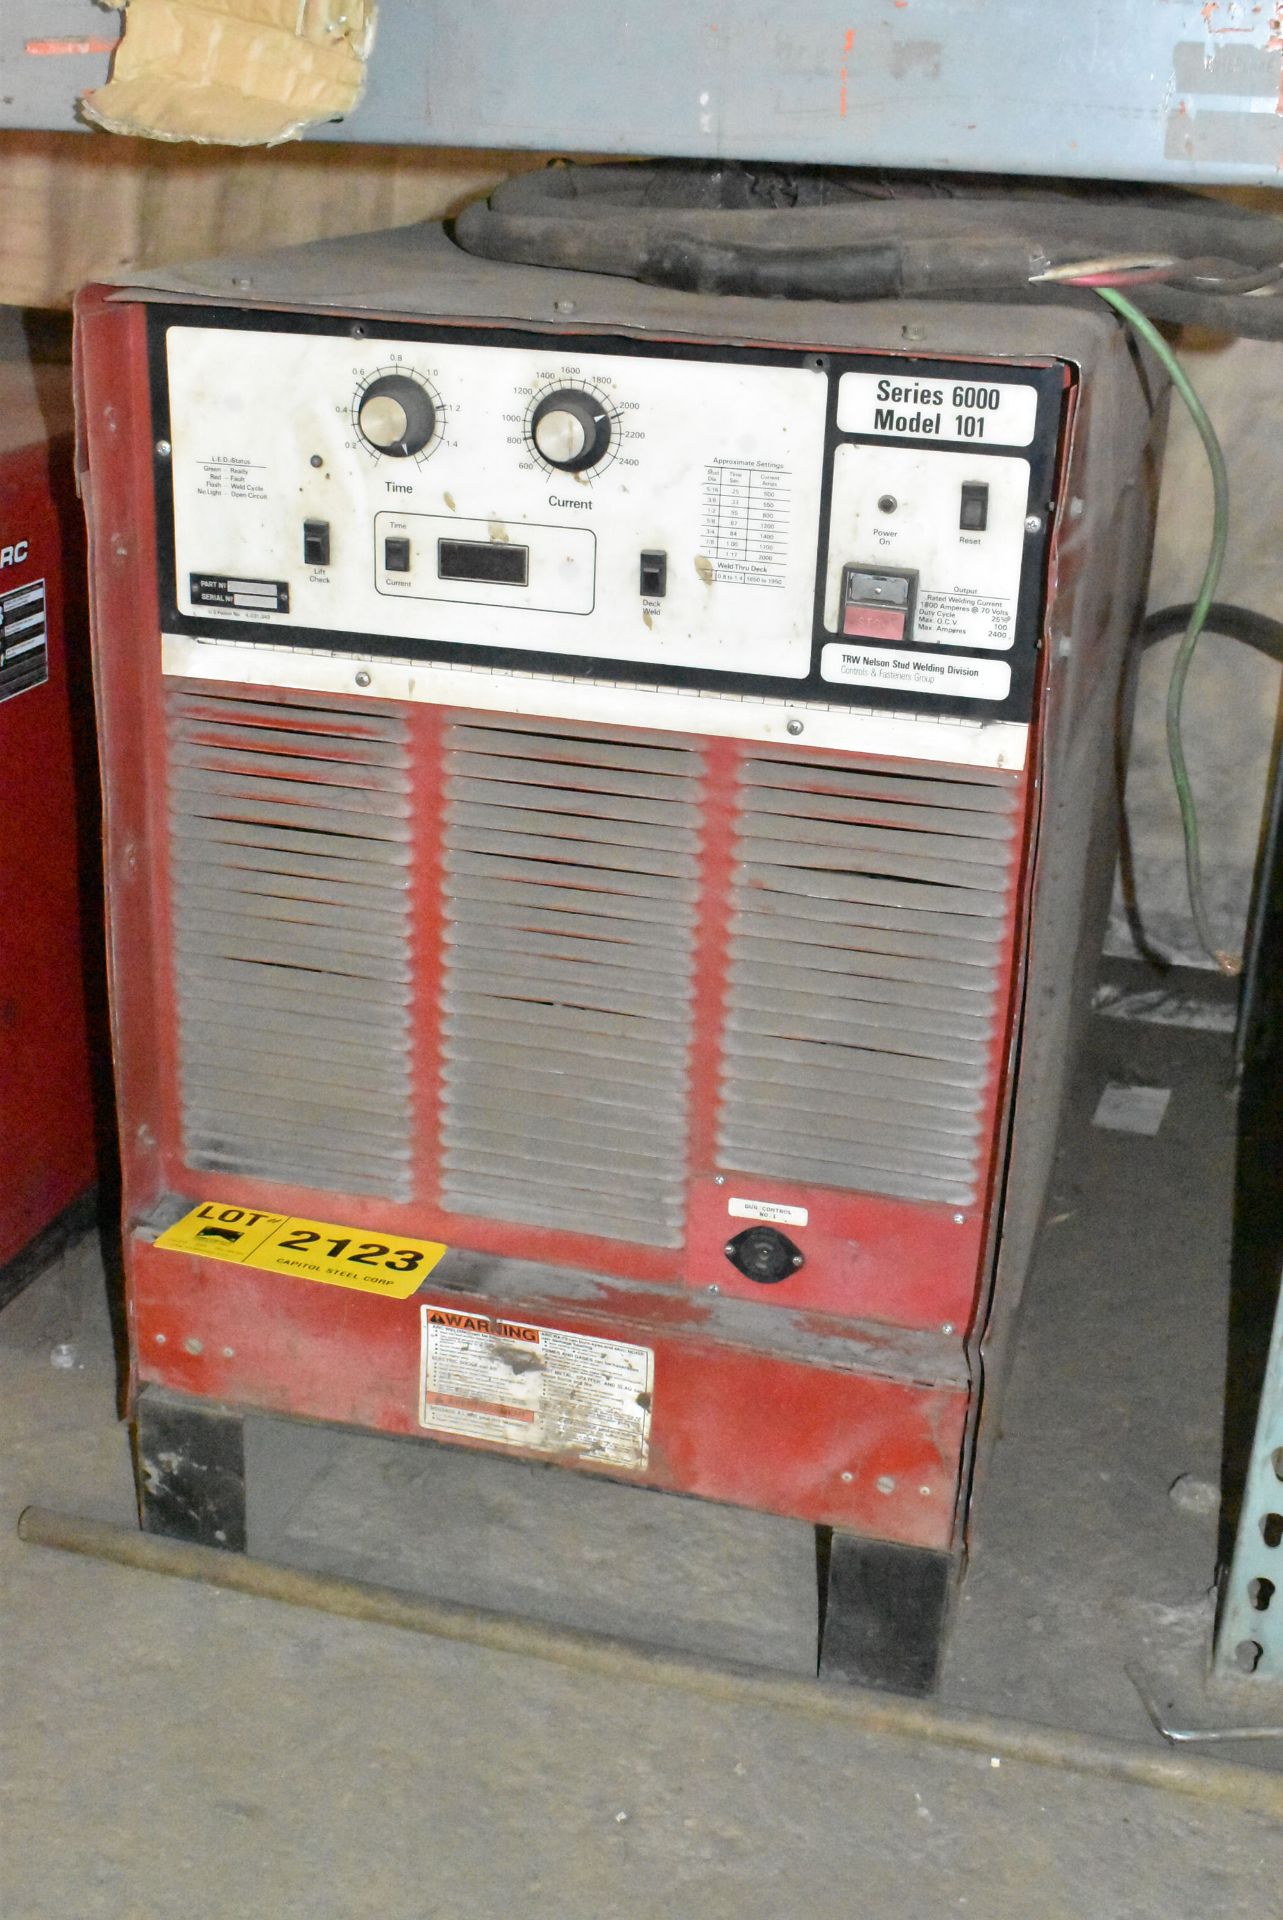 NELSON SERIES 6000 STUD WELDING POWER SOURCE [RIGGING FEES FOR LOT #2123 - $30 USD PLUS APPLICABLE